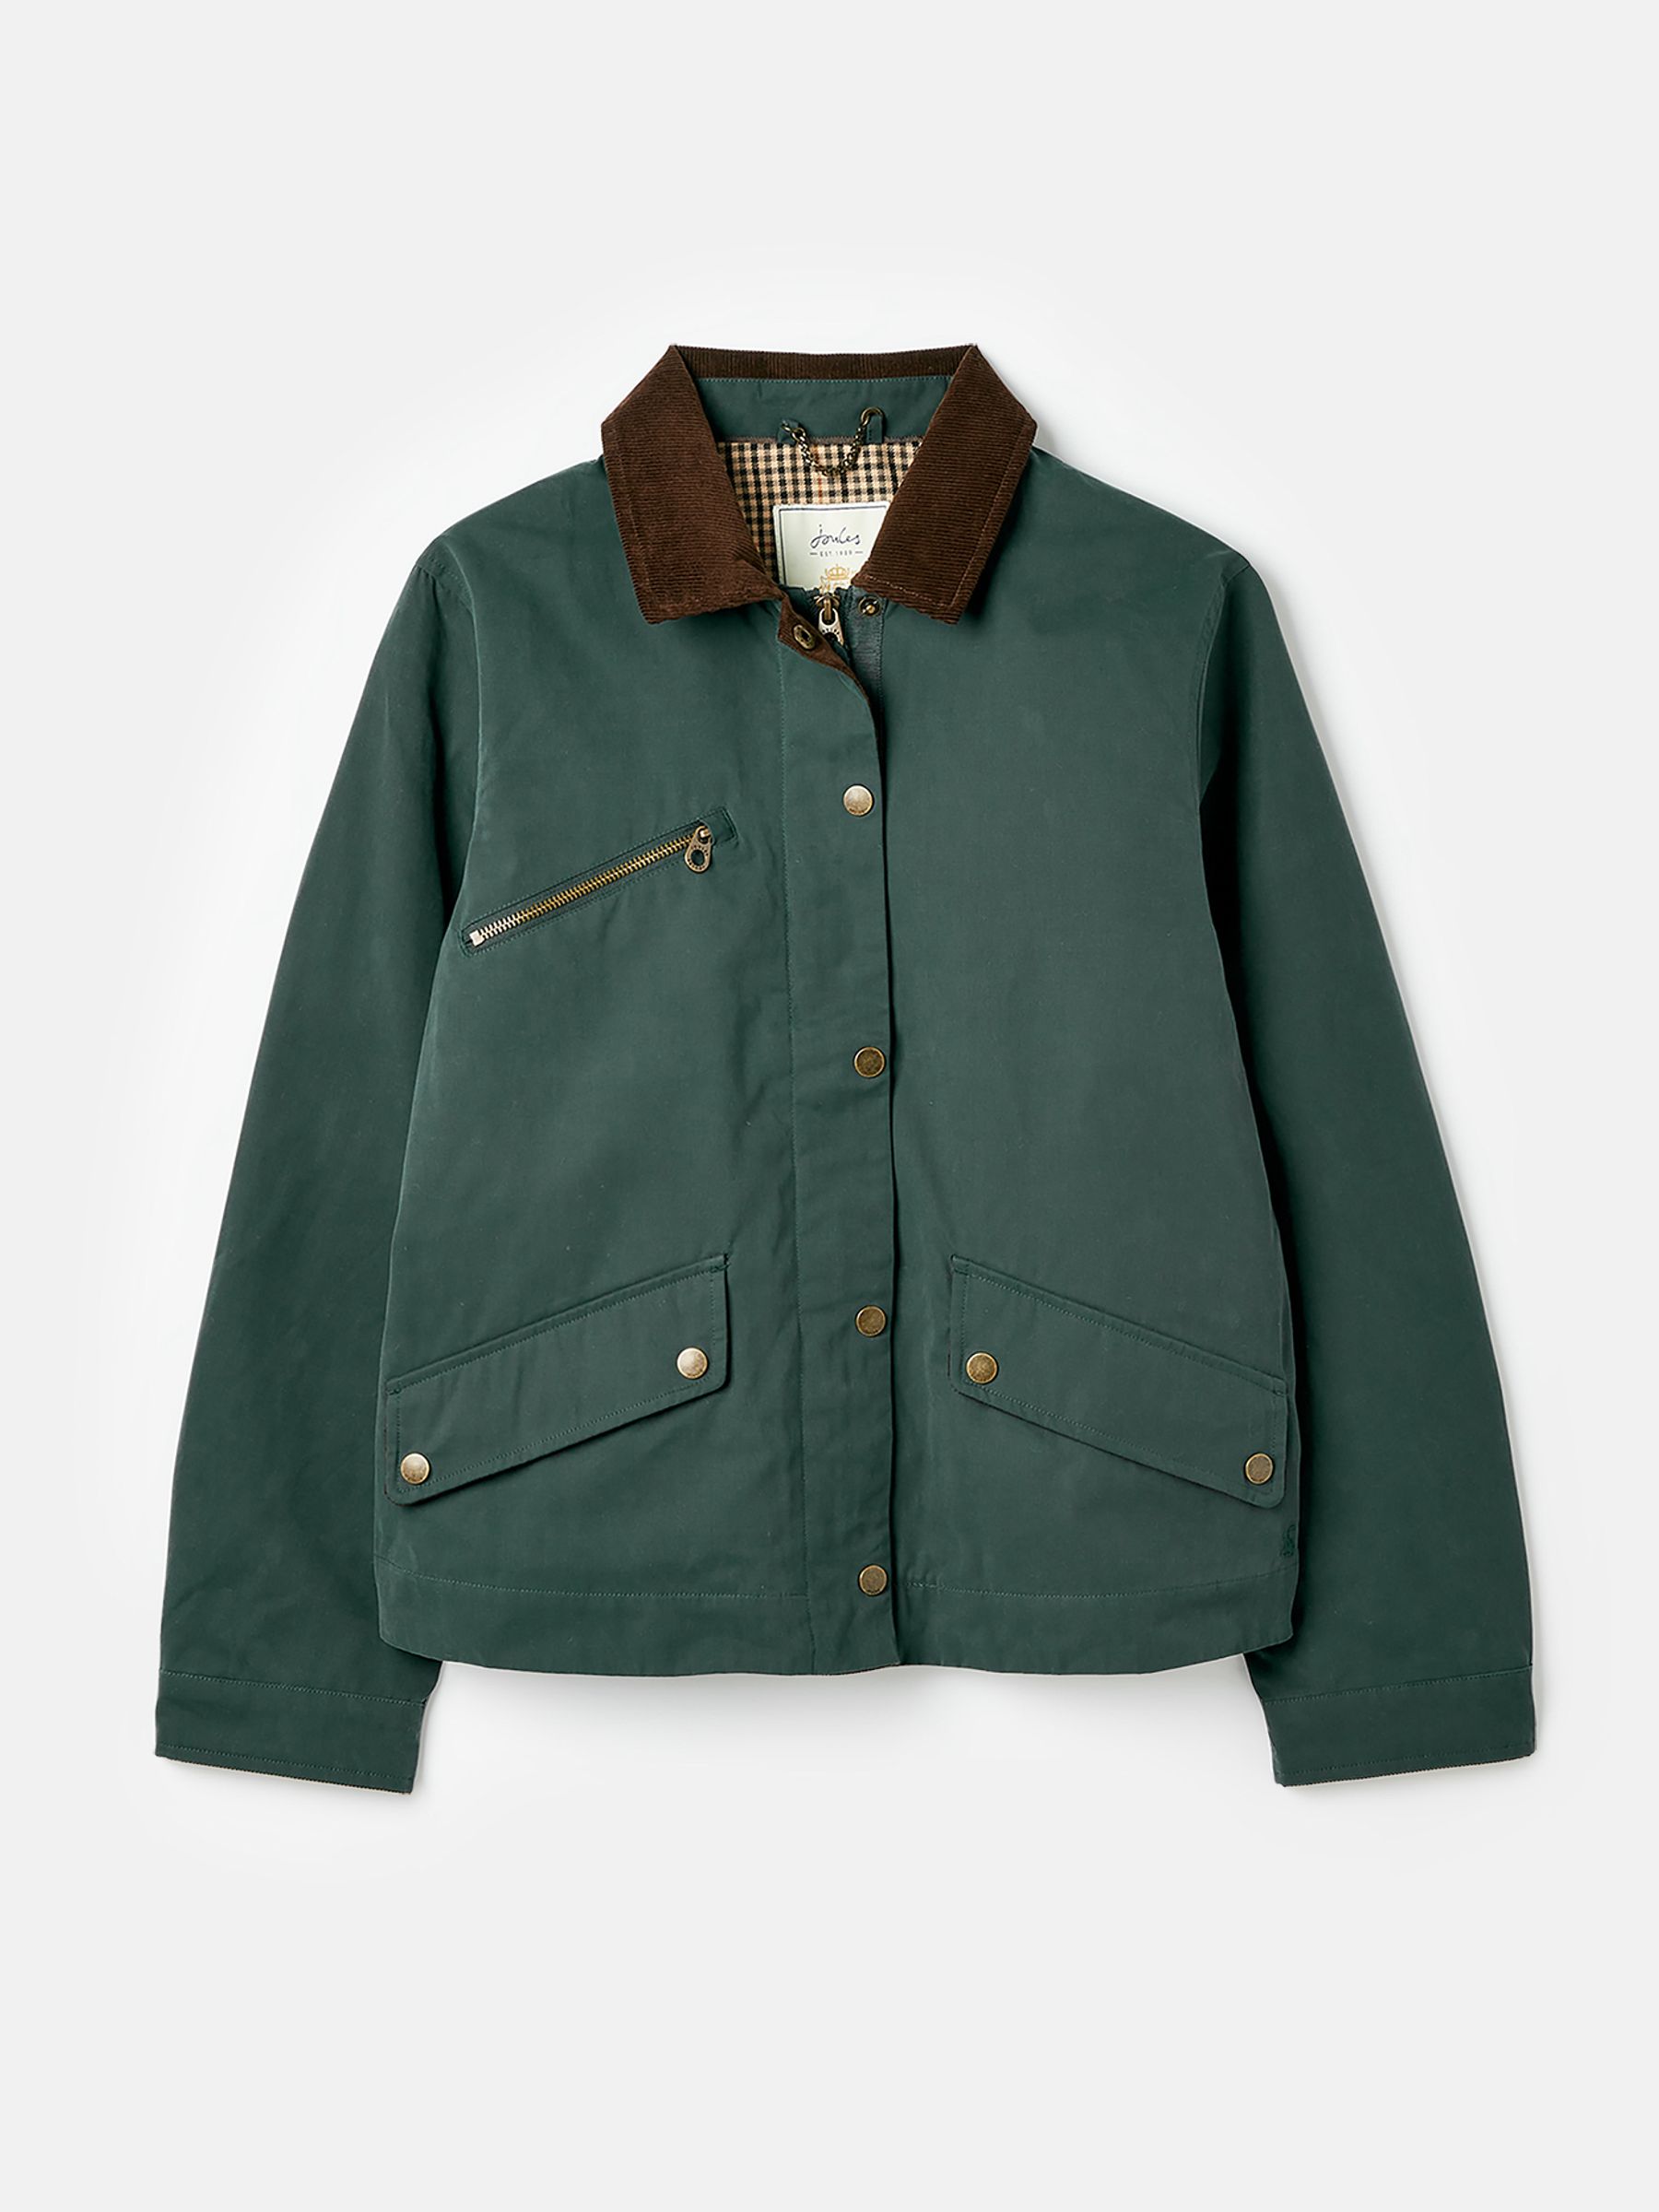 Buy Belfield Teal Blue Shower Resistant Dry Wax Jacket from the Joules ...